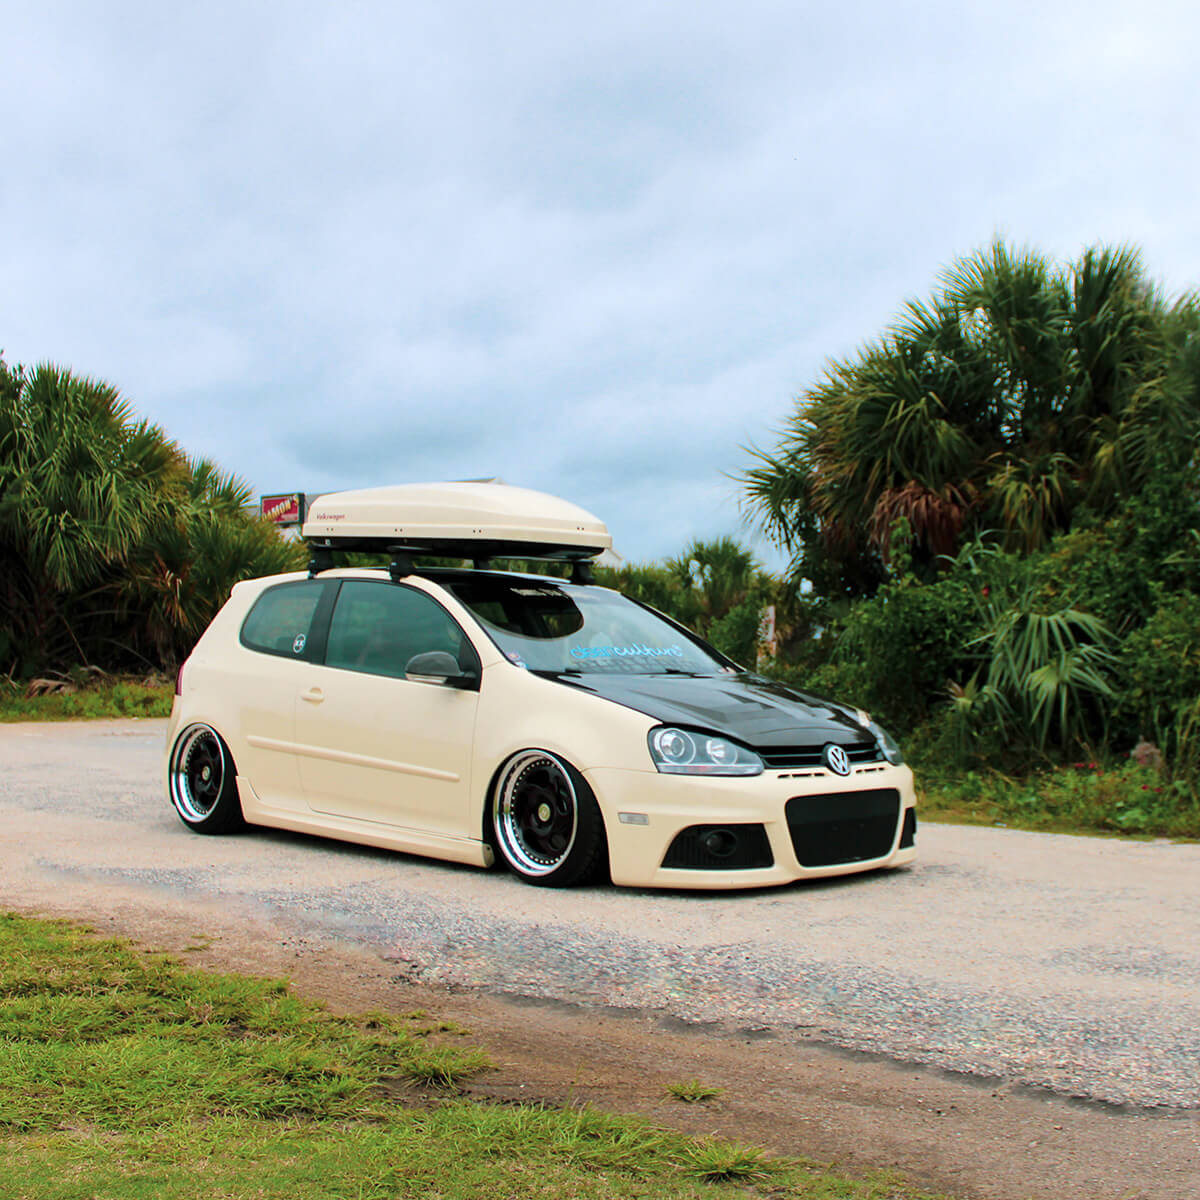 STANCED VW GOLF MK5 WITH A THUNDER BUNNY BODY KIT